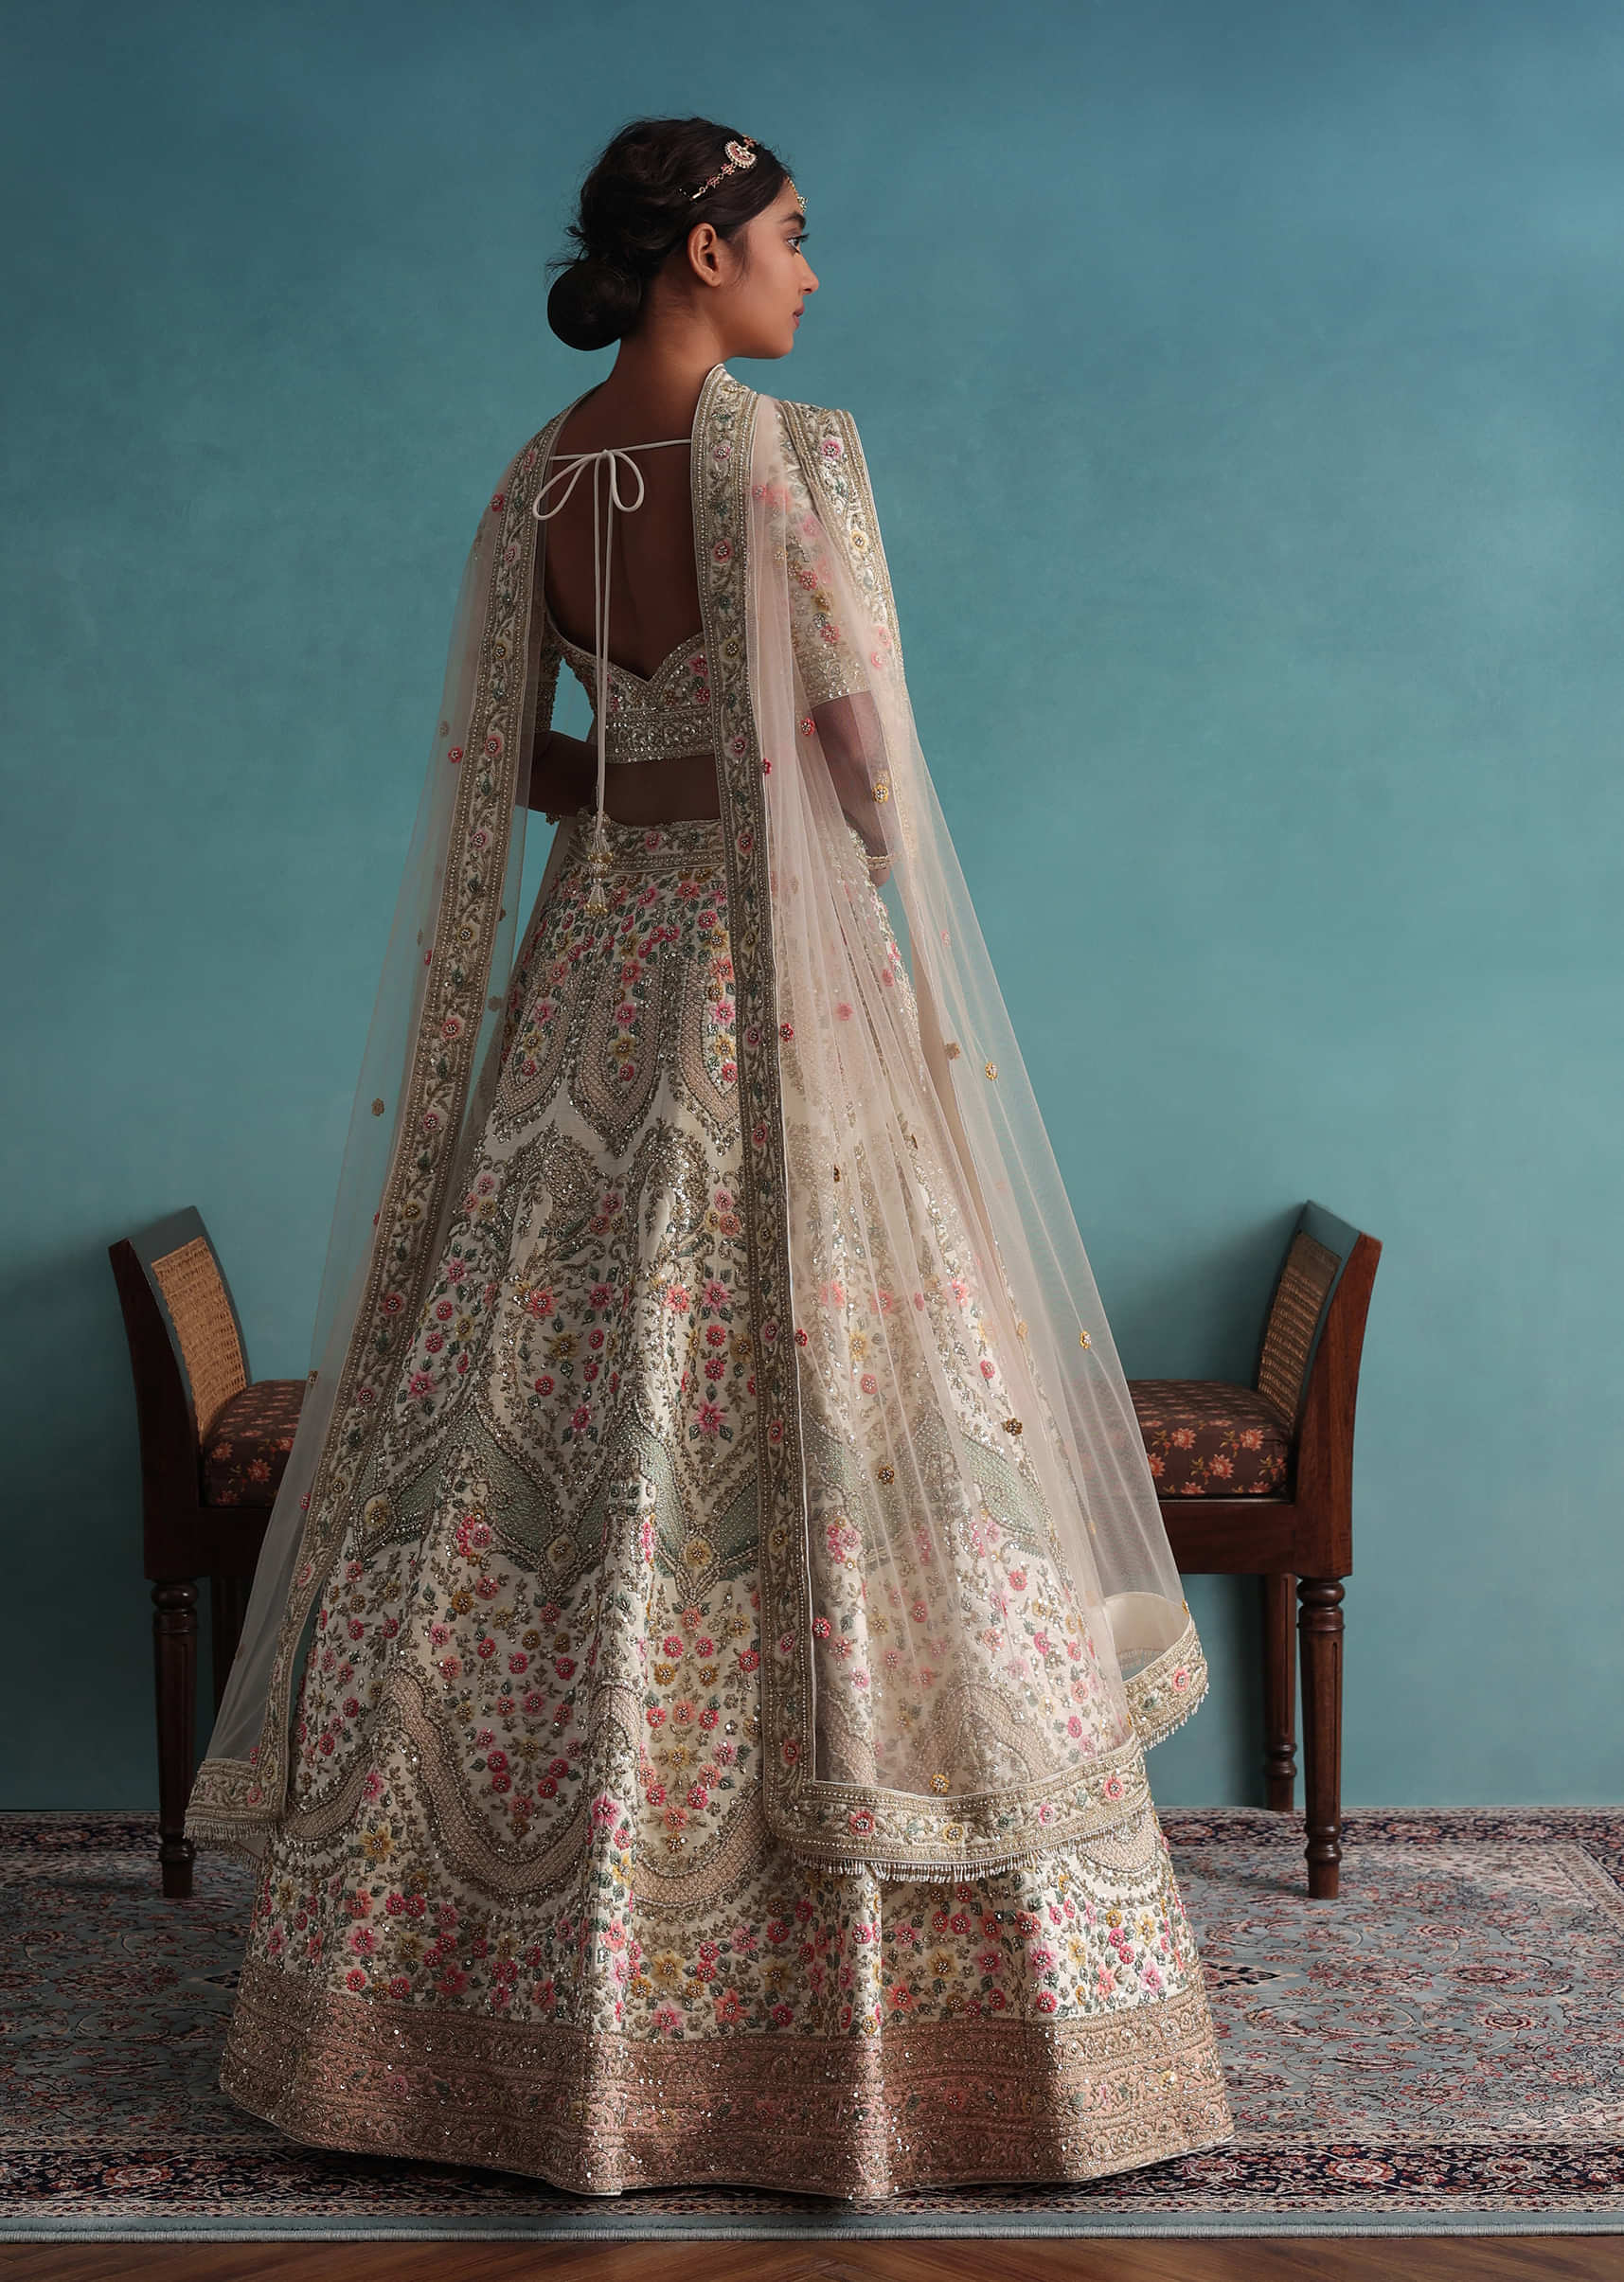 Pearl White Embroidered 12 Kali Bridal Lehenga In Raw Silk With Hand Embroidery